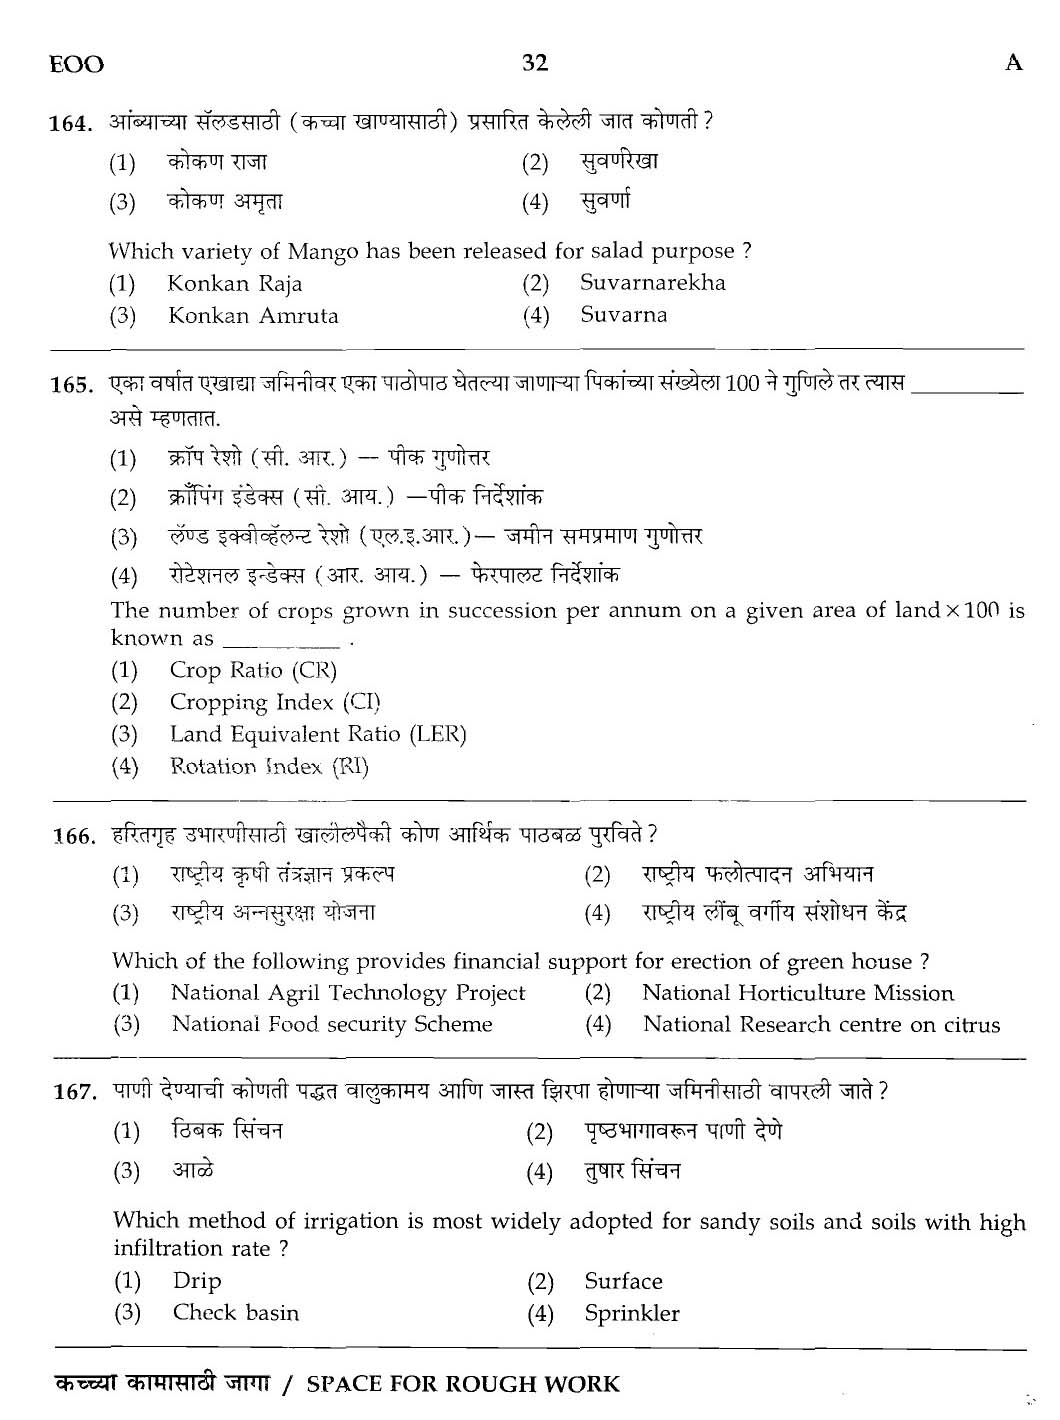 MPSC Agricultural Services Preliminary Exam 2012 Question Paper 31